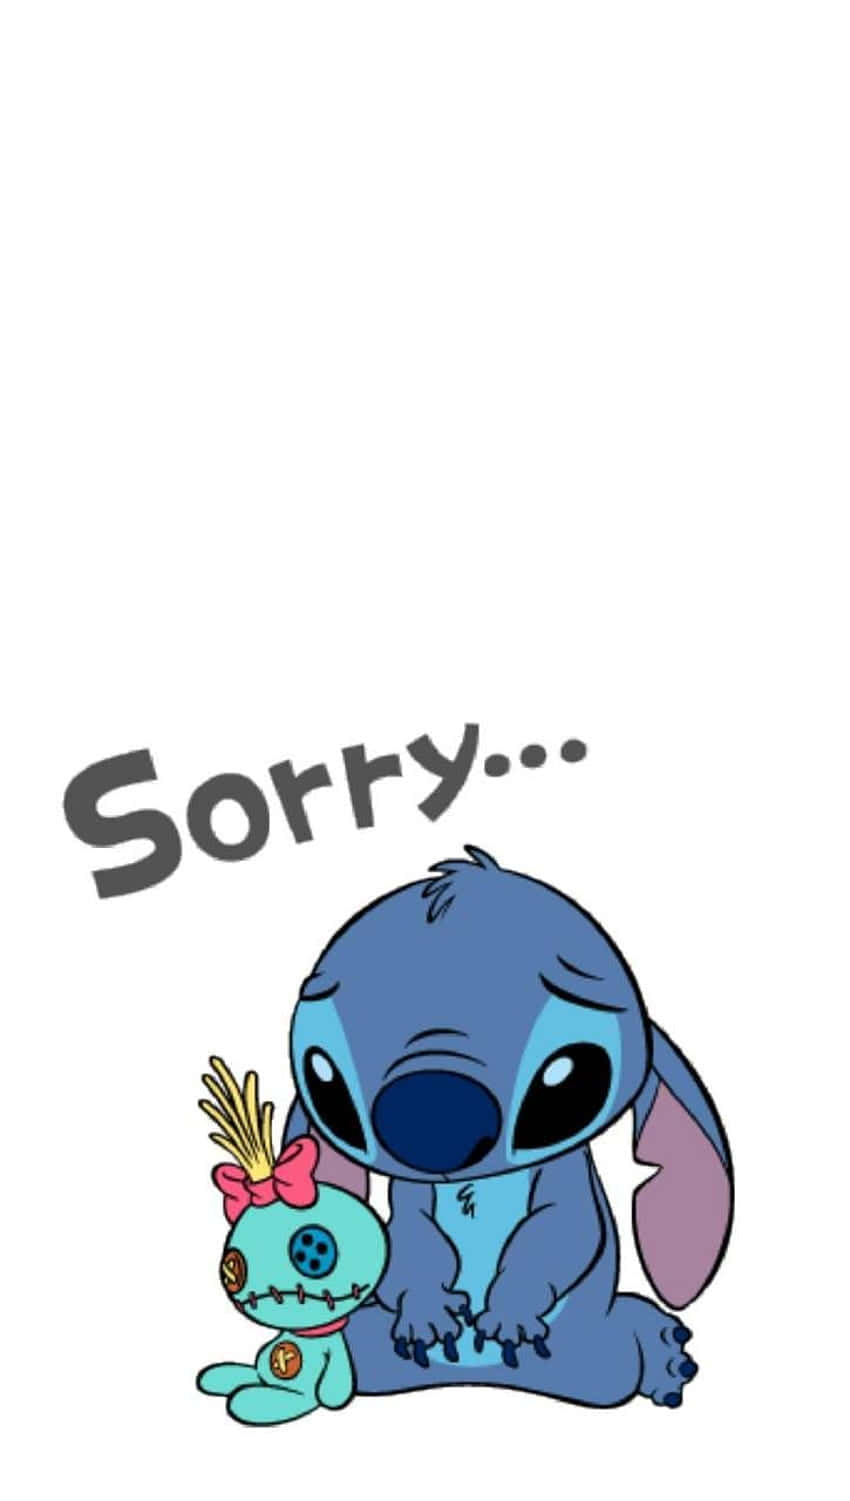 “A Sad Stitch, Ready for Any Emotional Challenge” Wallpaper